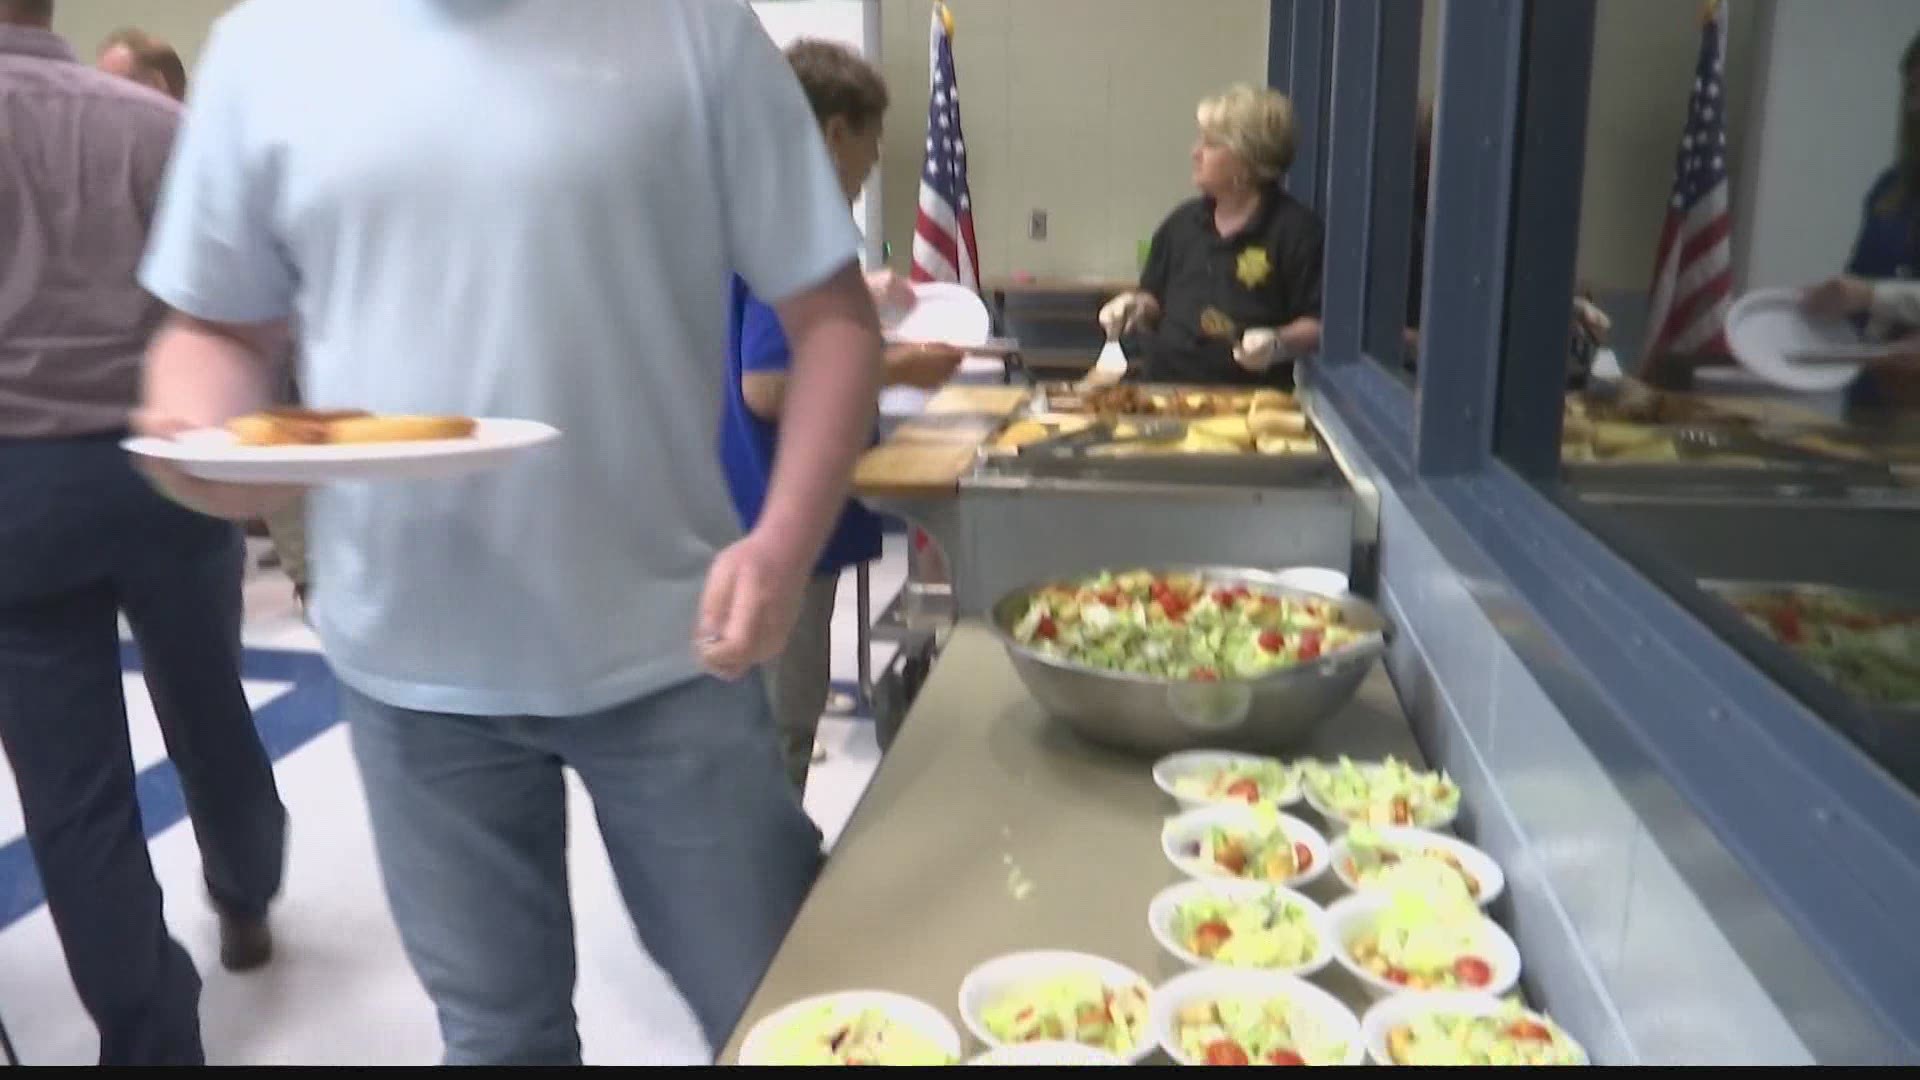 The Limestone County Sheriff's Office hosted a "Telecommunicator Appreciation Luncheon" April 13.